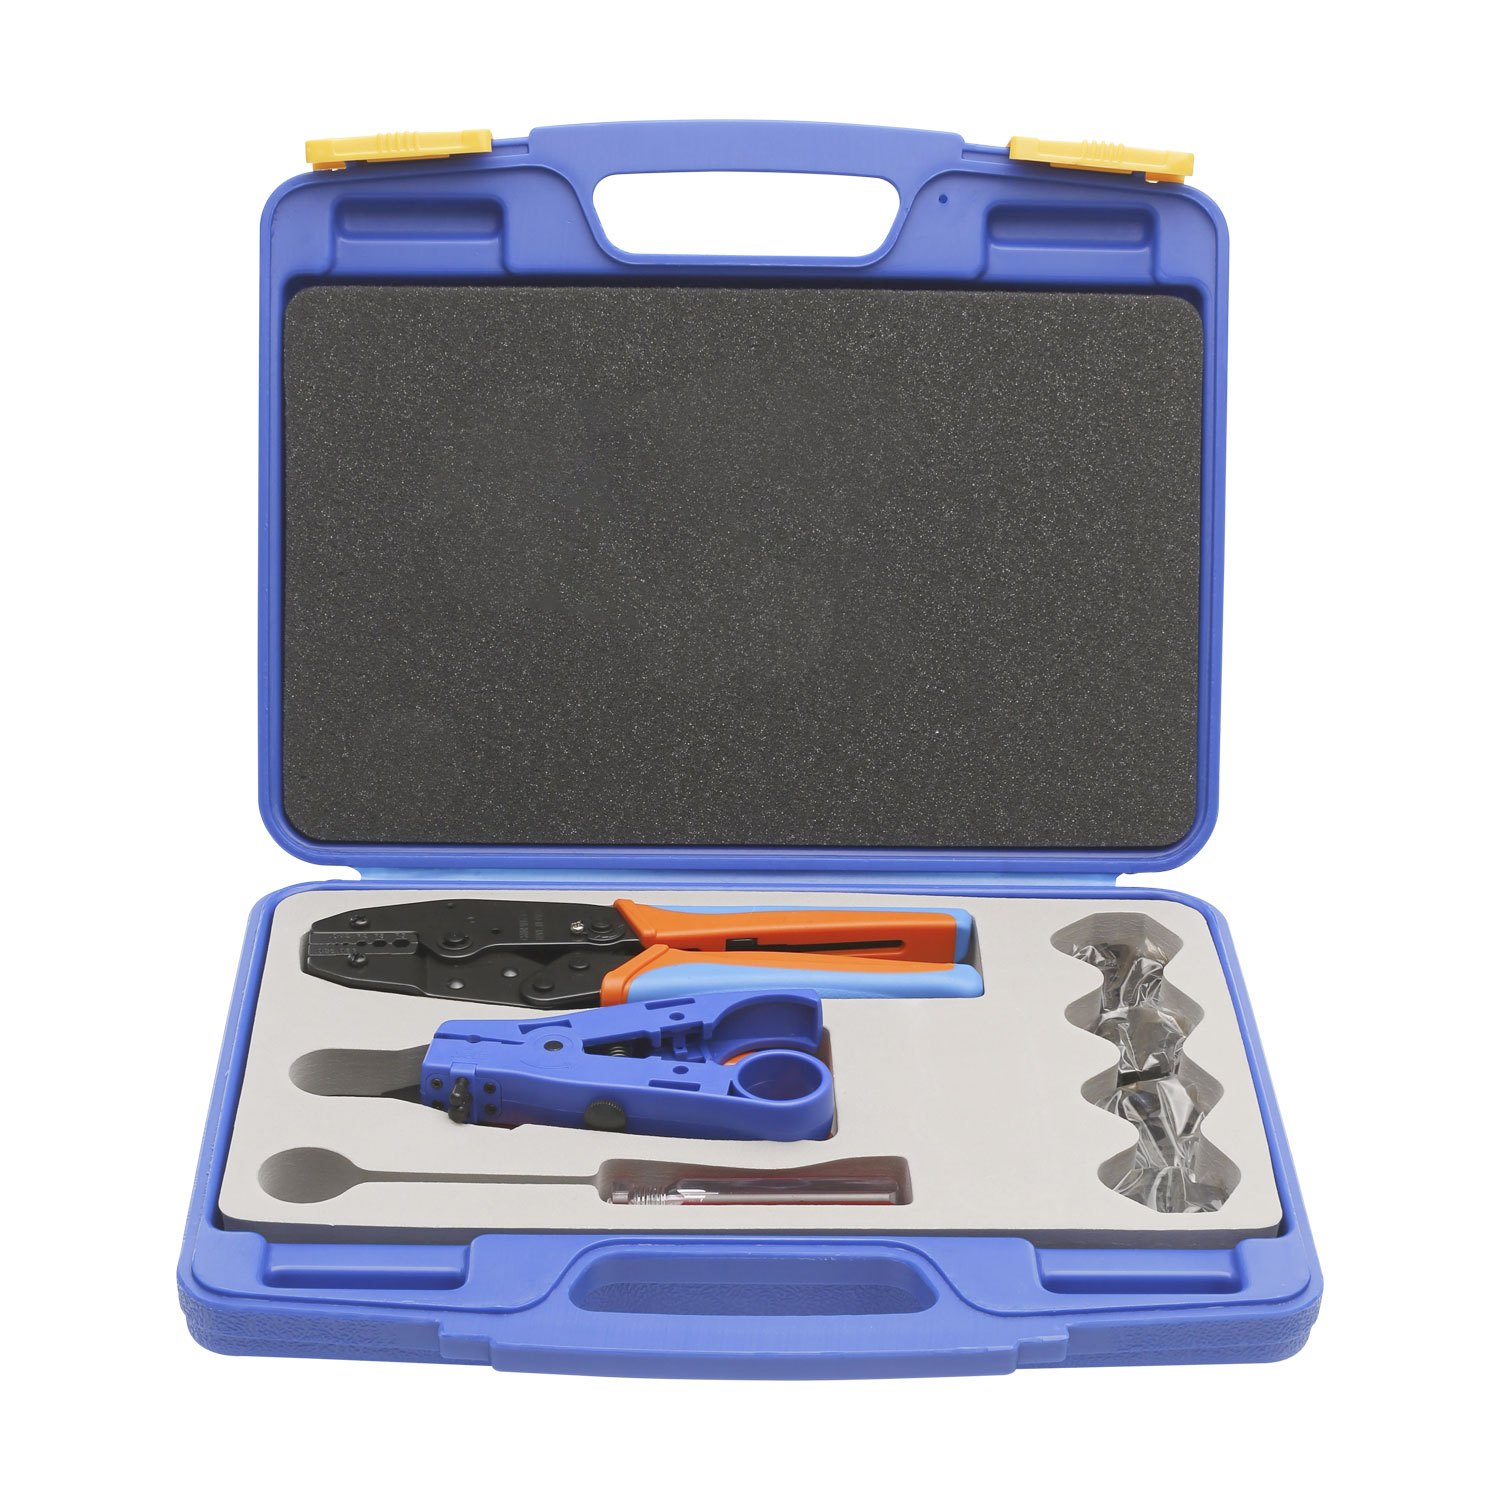 HICON Crimping pliers tool kit w. case for BNC crimping connectors